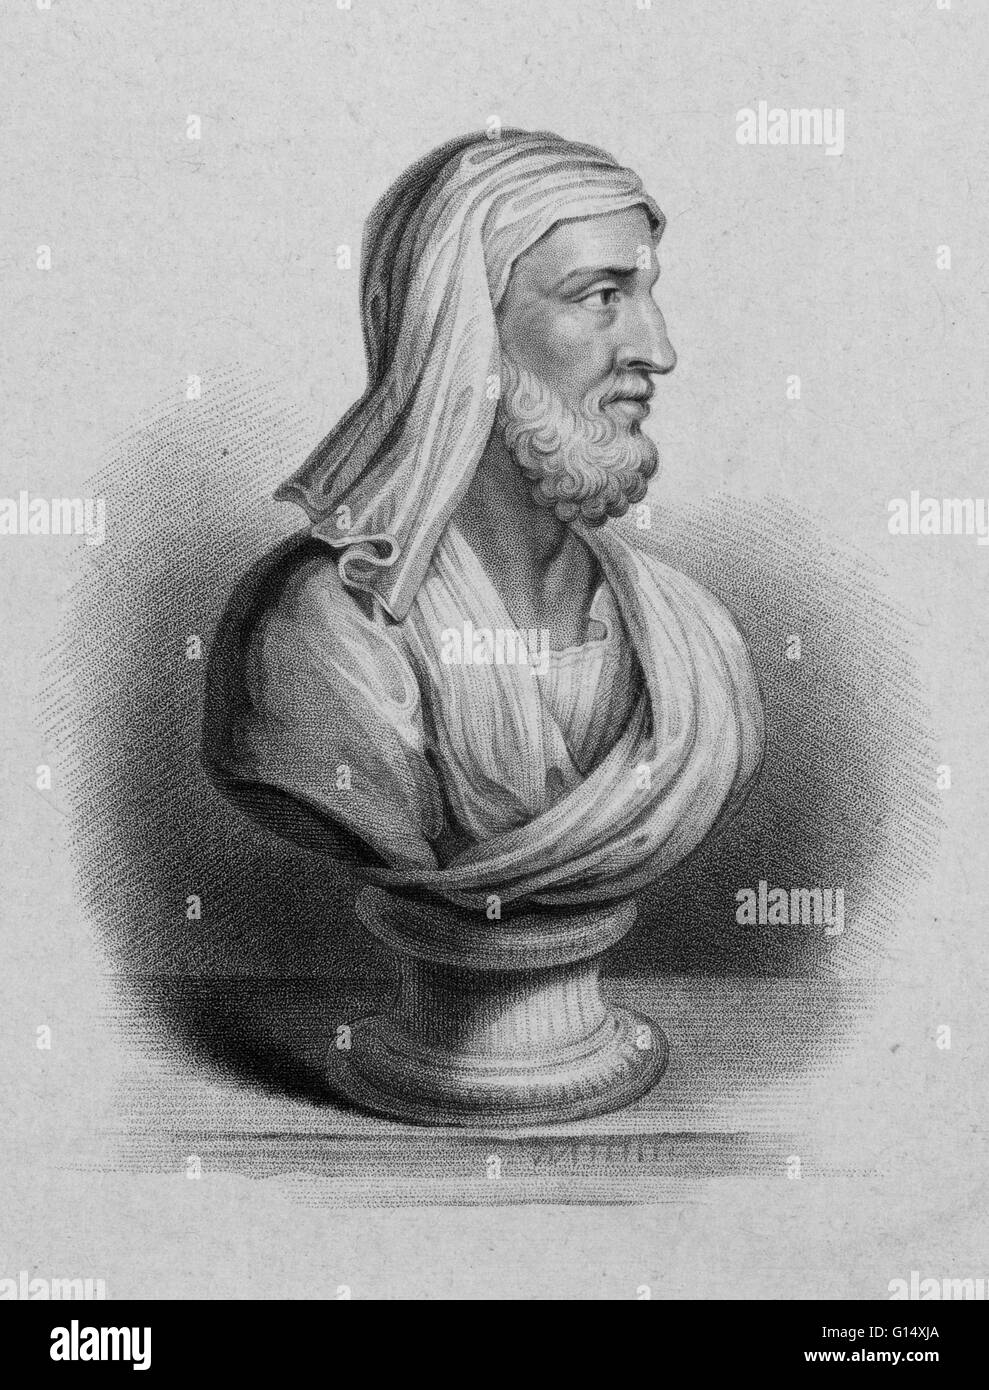 Lucius Mestrius Plutarchus (46-120 AD) was a Greek historian, biographer, essayist, and Middle Platonist known primarily for his Parallel Lives and Moralia. In addition to his duties as a priest of the Delphic temple, Plutarch was also a magistrate in Cha Stock Photo